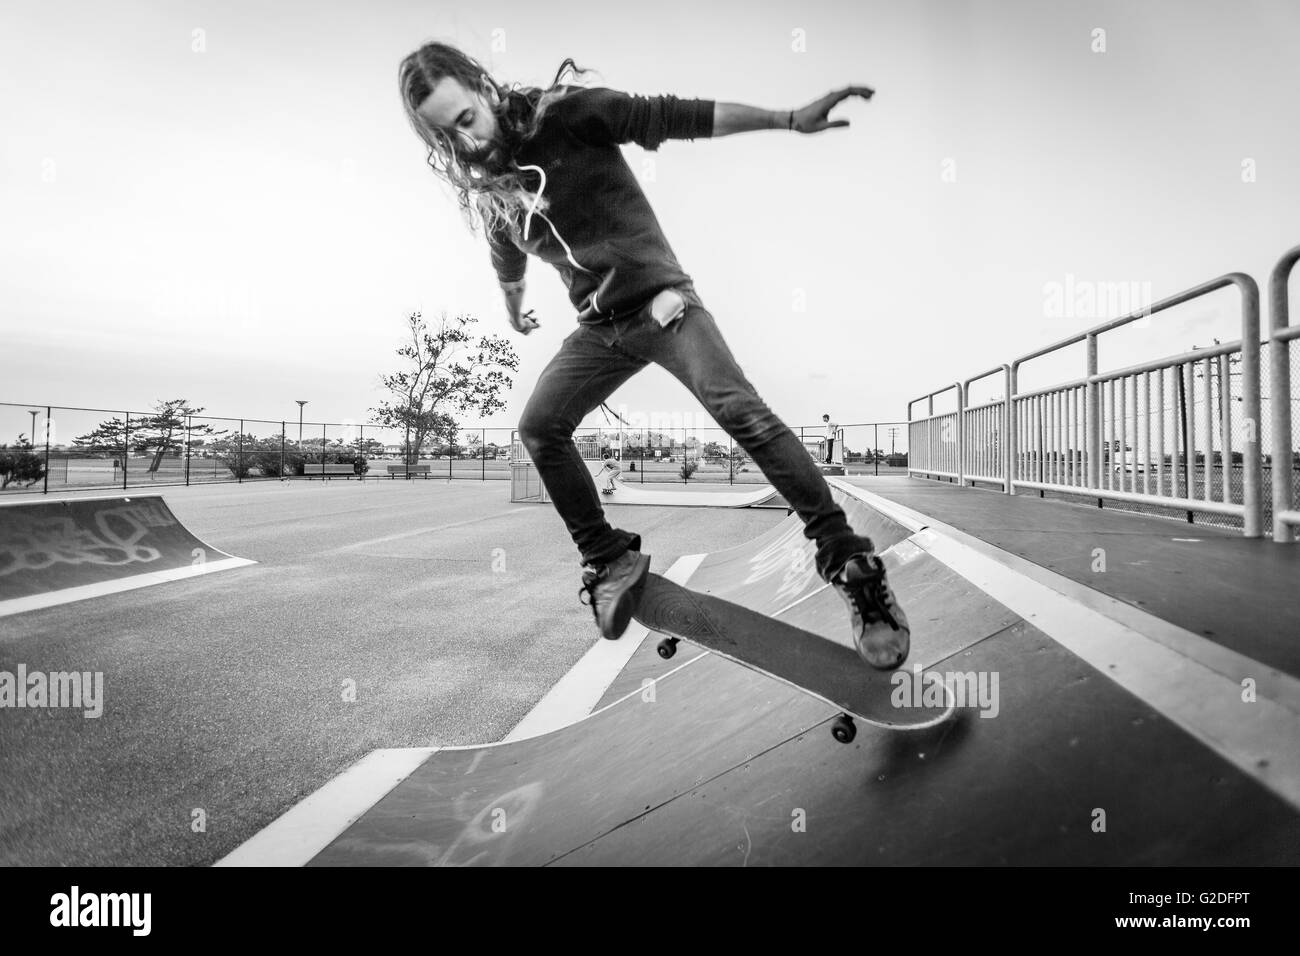 Young Adult Man Doing Tricks with Skateboard at Skate Park Stock Photo